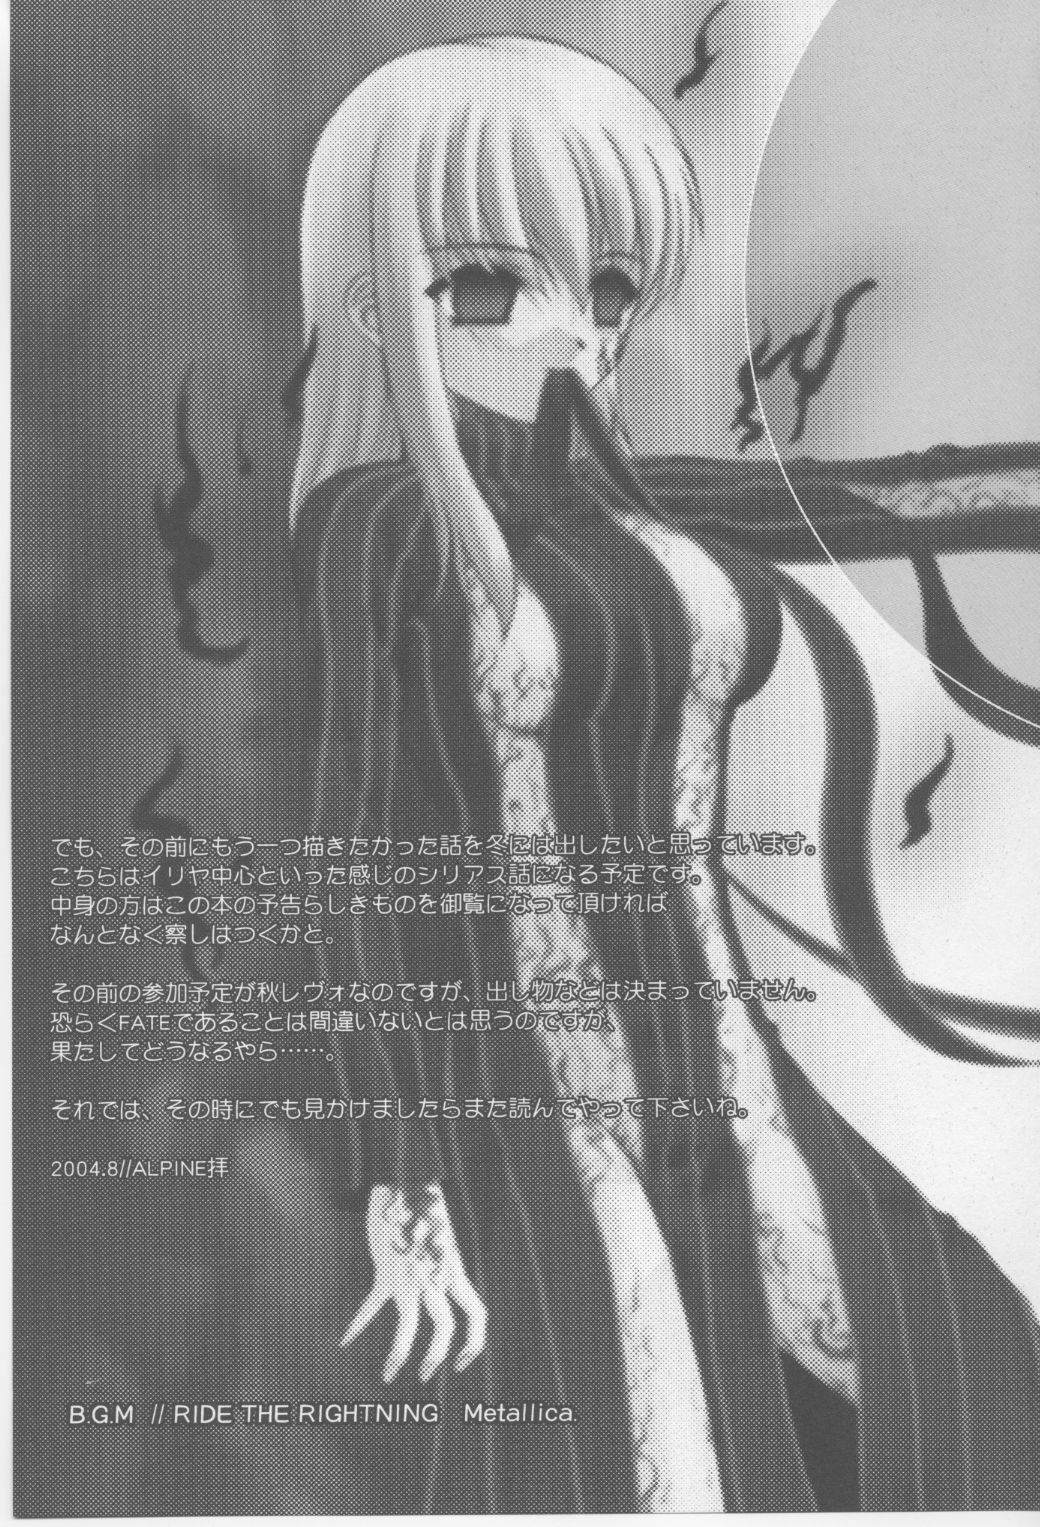 (C66) [Dieppe Factory (Alpine)] FADE TO BLACK VOL.1 (Fate/Stay Night) page 40 full